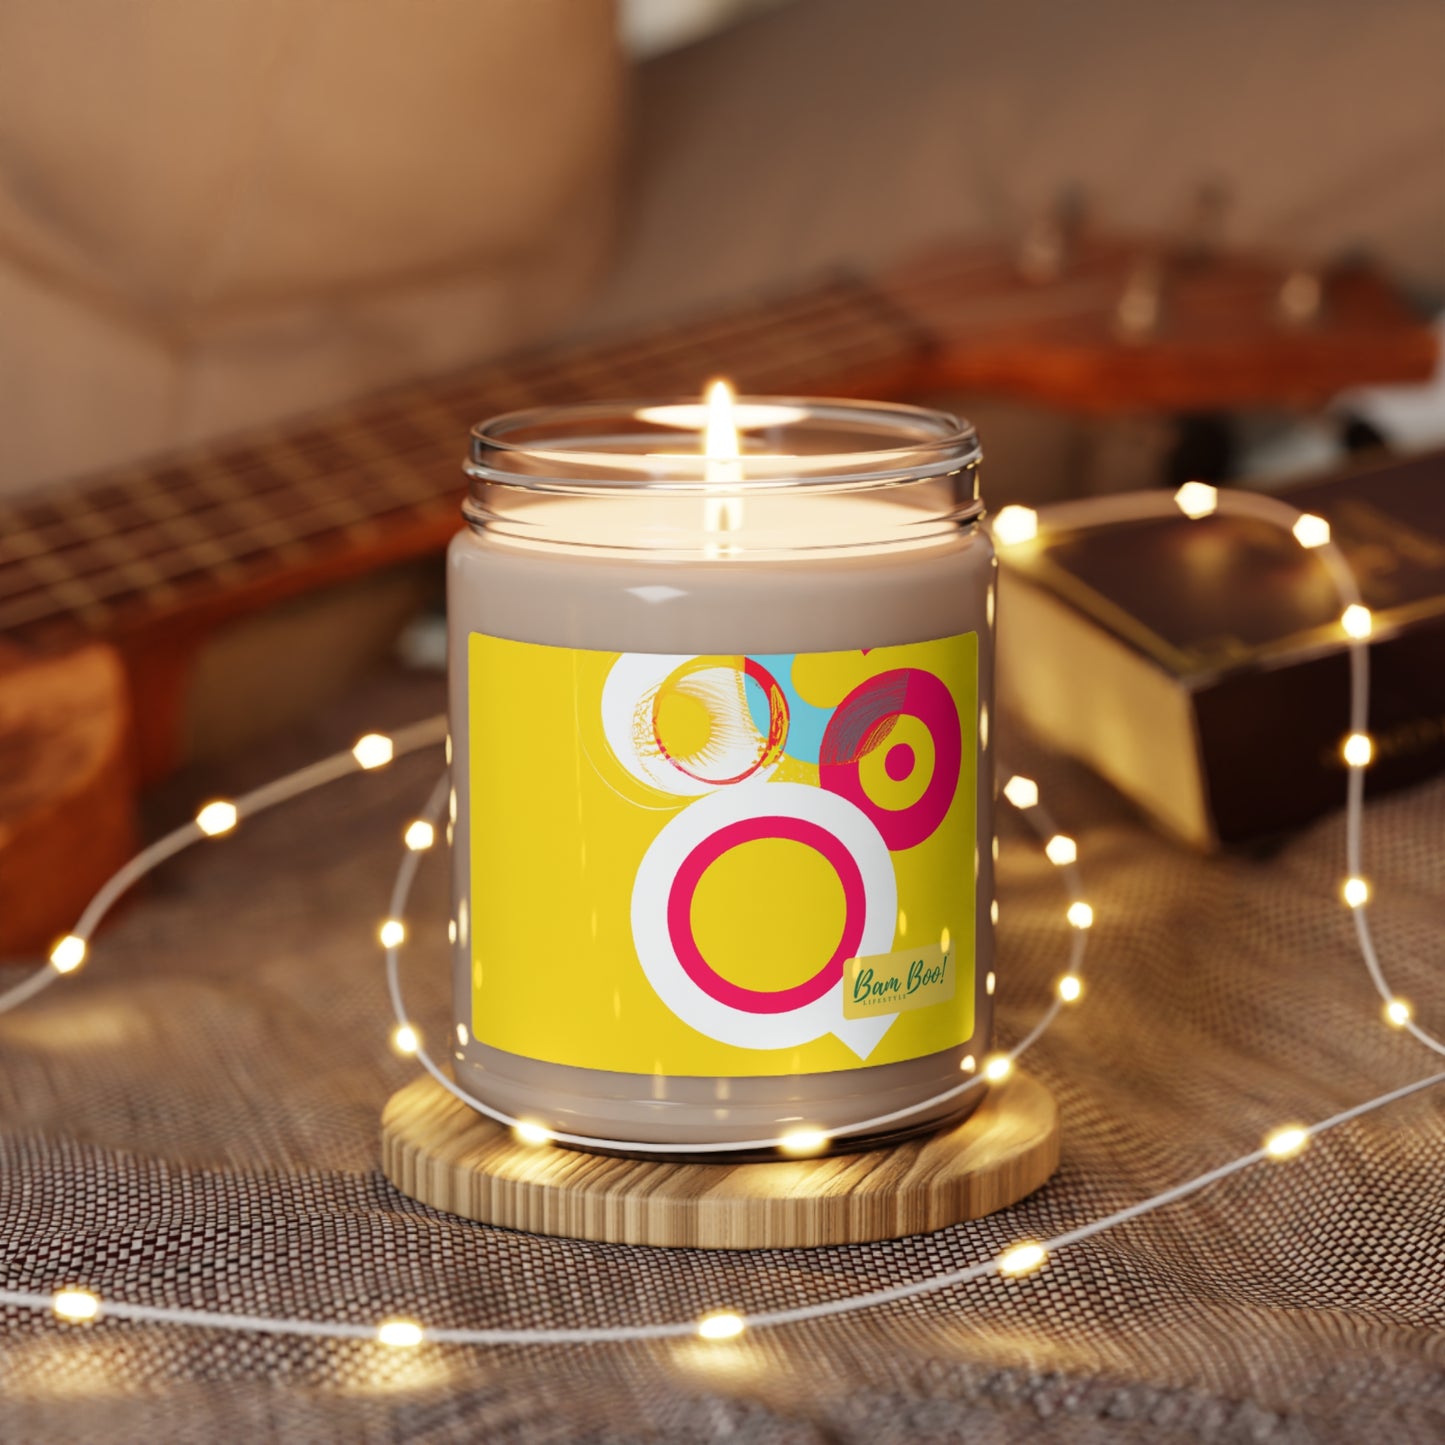 "Abstract Imaginary: Crafting a Digital Mosaic". - Bam Boo! Lifestyle Eco-friendly Soy Candle